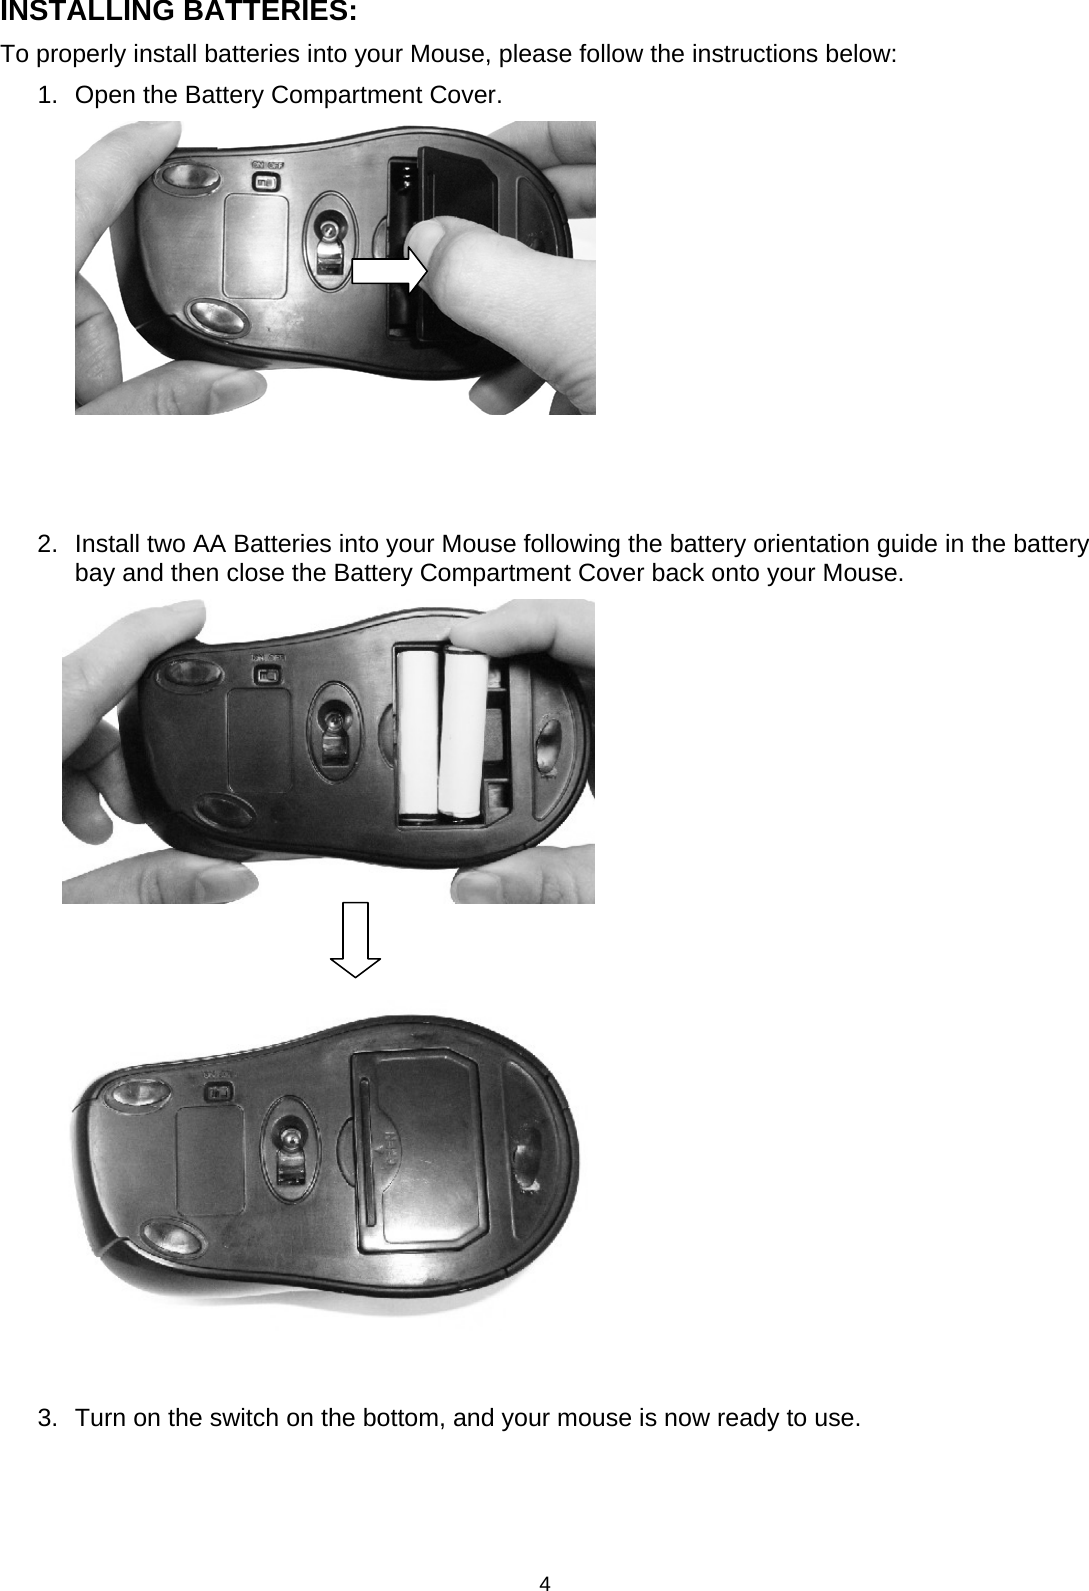 4 INSTALLING BATTERIES: To properly install batteries into your Mouse, please follow the instructions below: 1.  Open the Battery Compartment Cover.          2.  Install two AA Batteries into your Mouse following the battery orientation guide in the battery bay and then close the Battery Compartment Cover back onto your Mouse.                                3.  Turn on the switch on the bottom, and your mouse is now ready to use.    